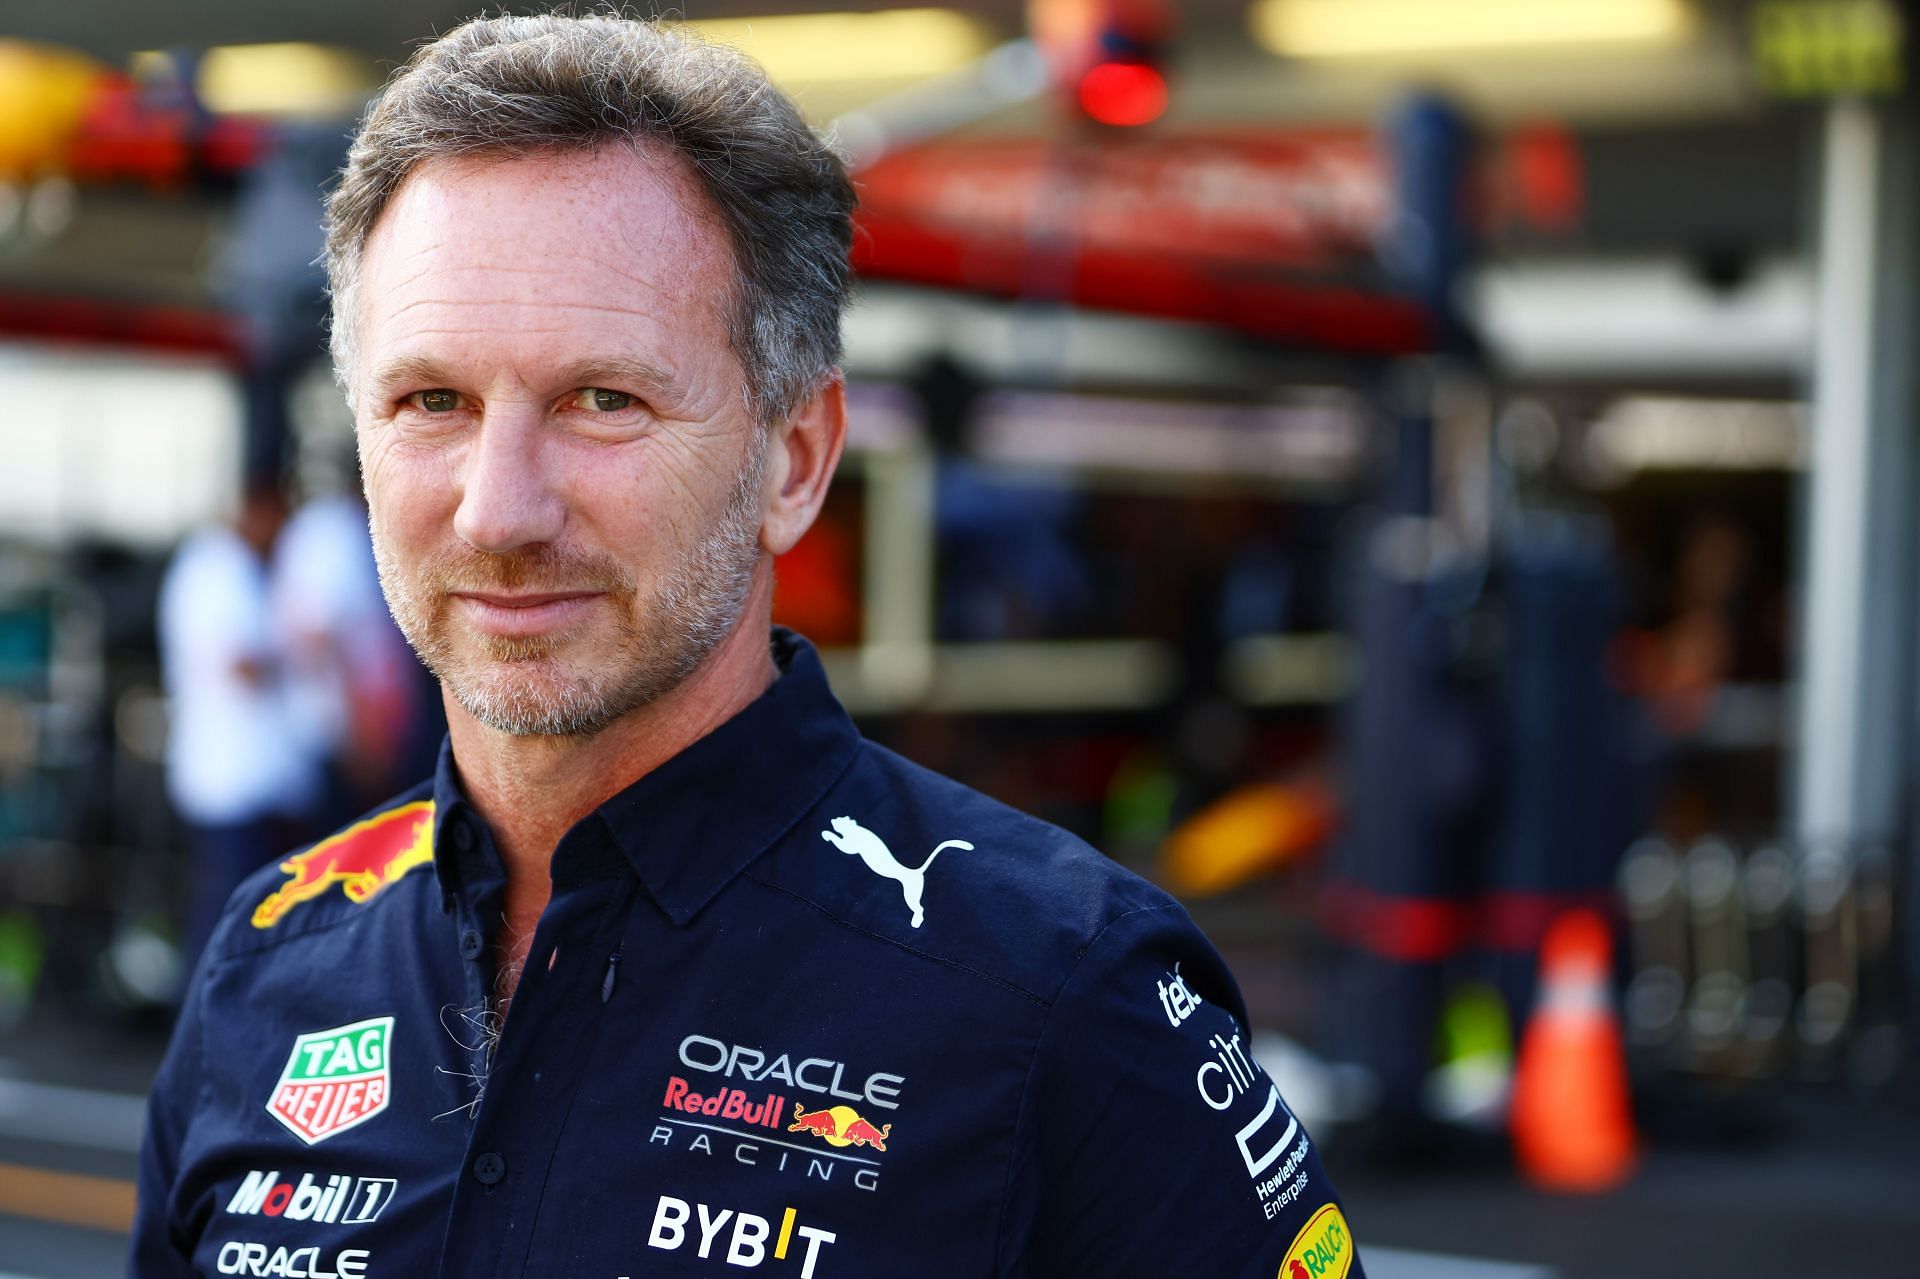 Red Bull Racing team principal Christian Horner during qualifying ahead of the 2022 F1 Grand Prix of Azerbaijan (Photo by Mark Thompson/Getty Images)